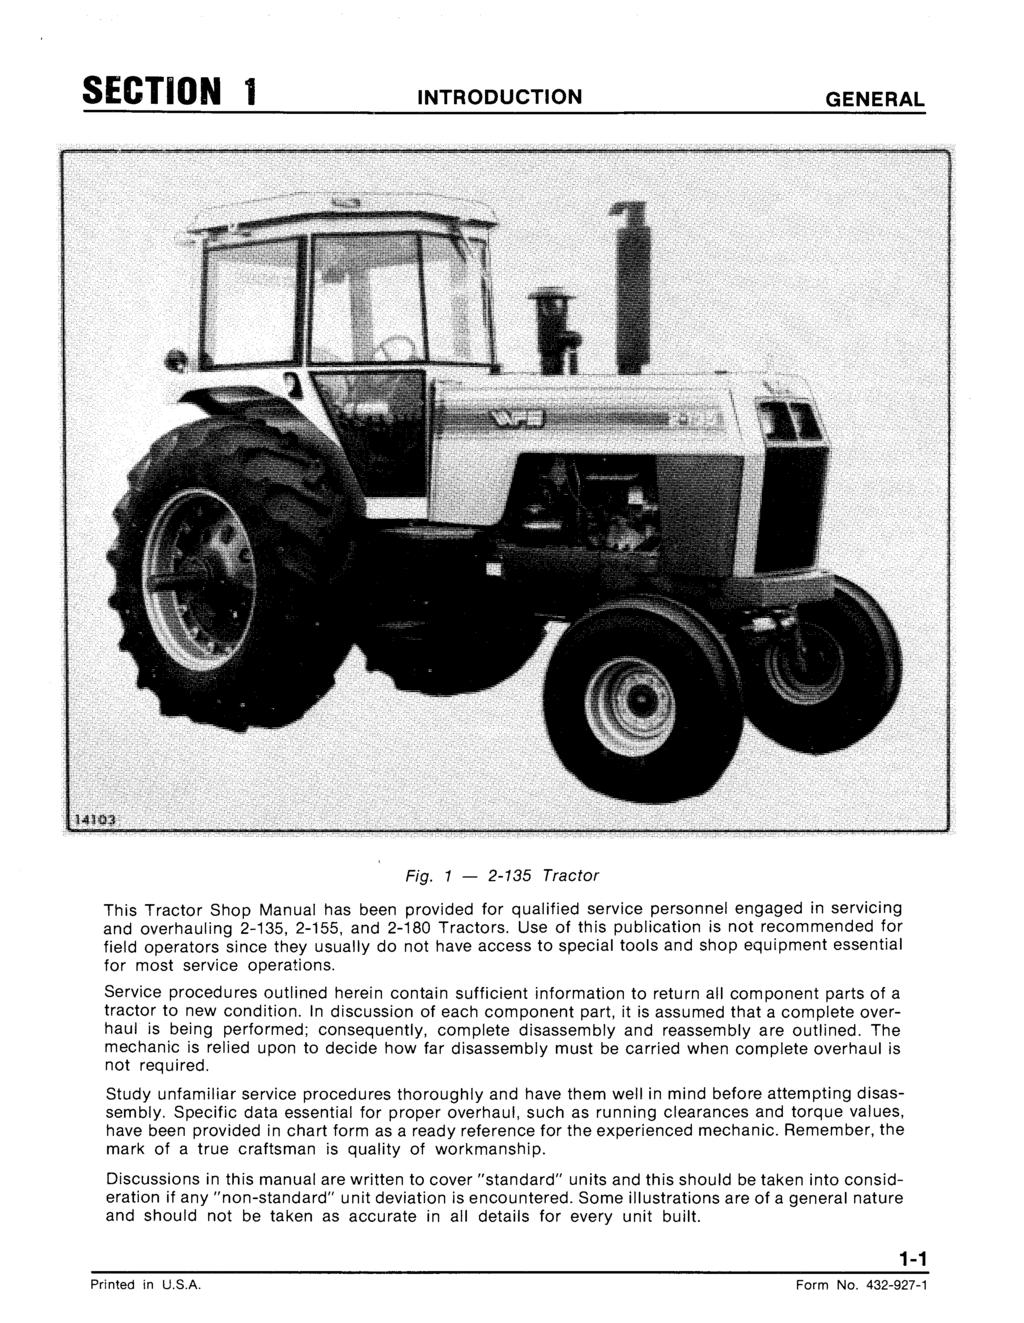 SECTION 1 INTRODUCTION GENERAL Fig. 1-2-135 Tractor This Tractor Shop Manual has been provided for qualified service personnel engaged in servicing and overhauling 2-135, 2-155, and 2-180 Tractors.